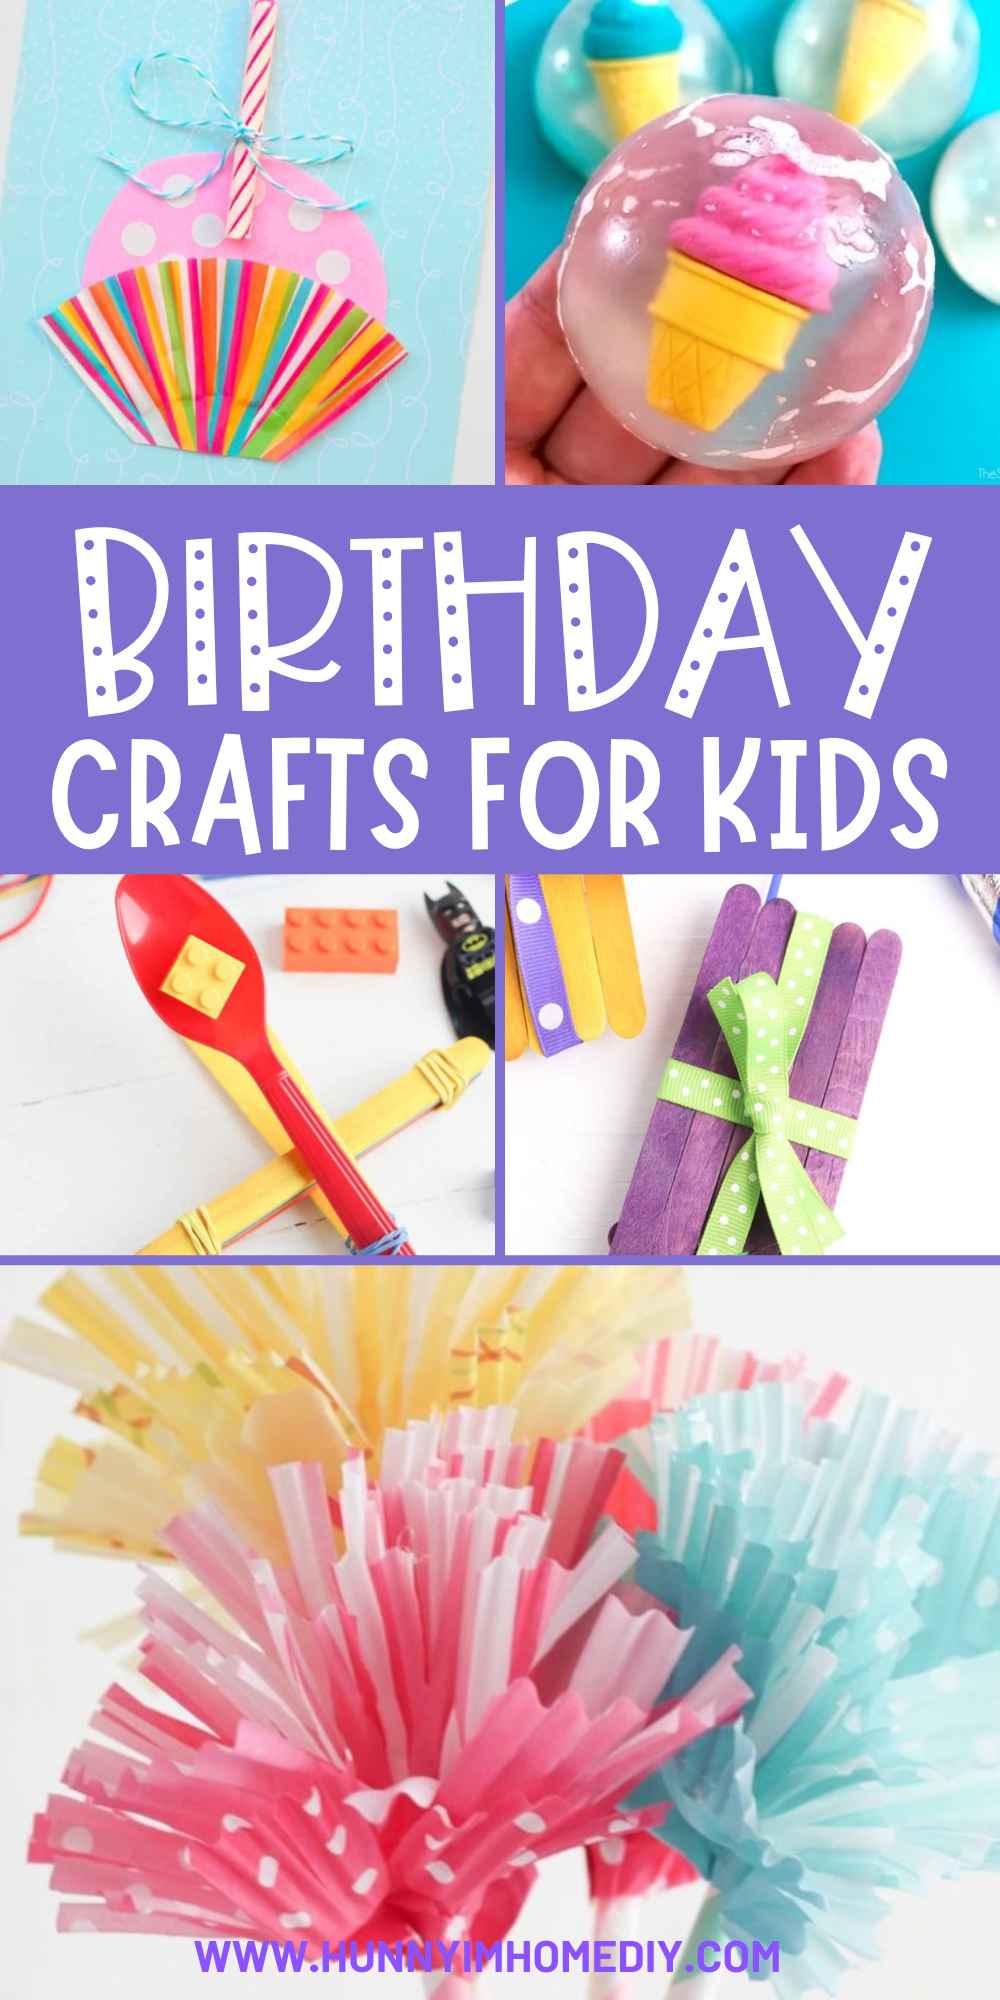 24 Fun Birthday Crafts for Kids Perfect for a Party